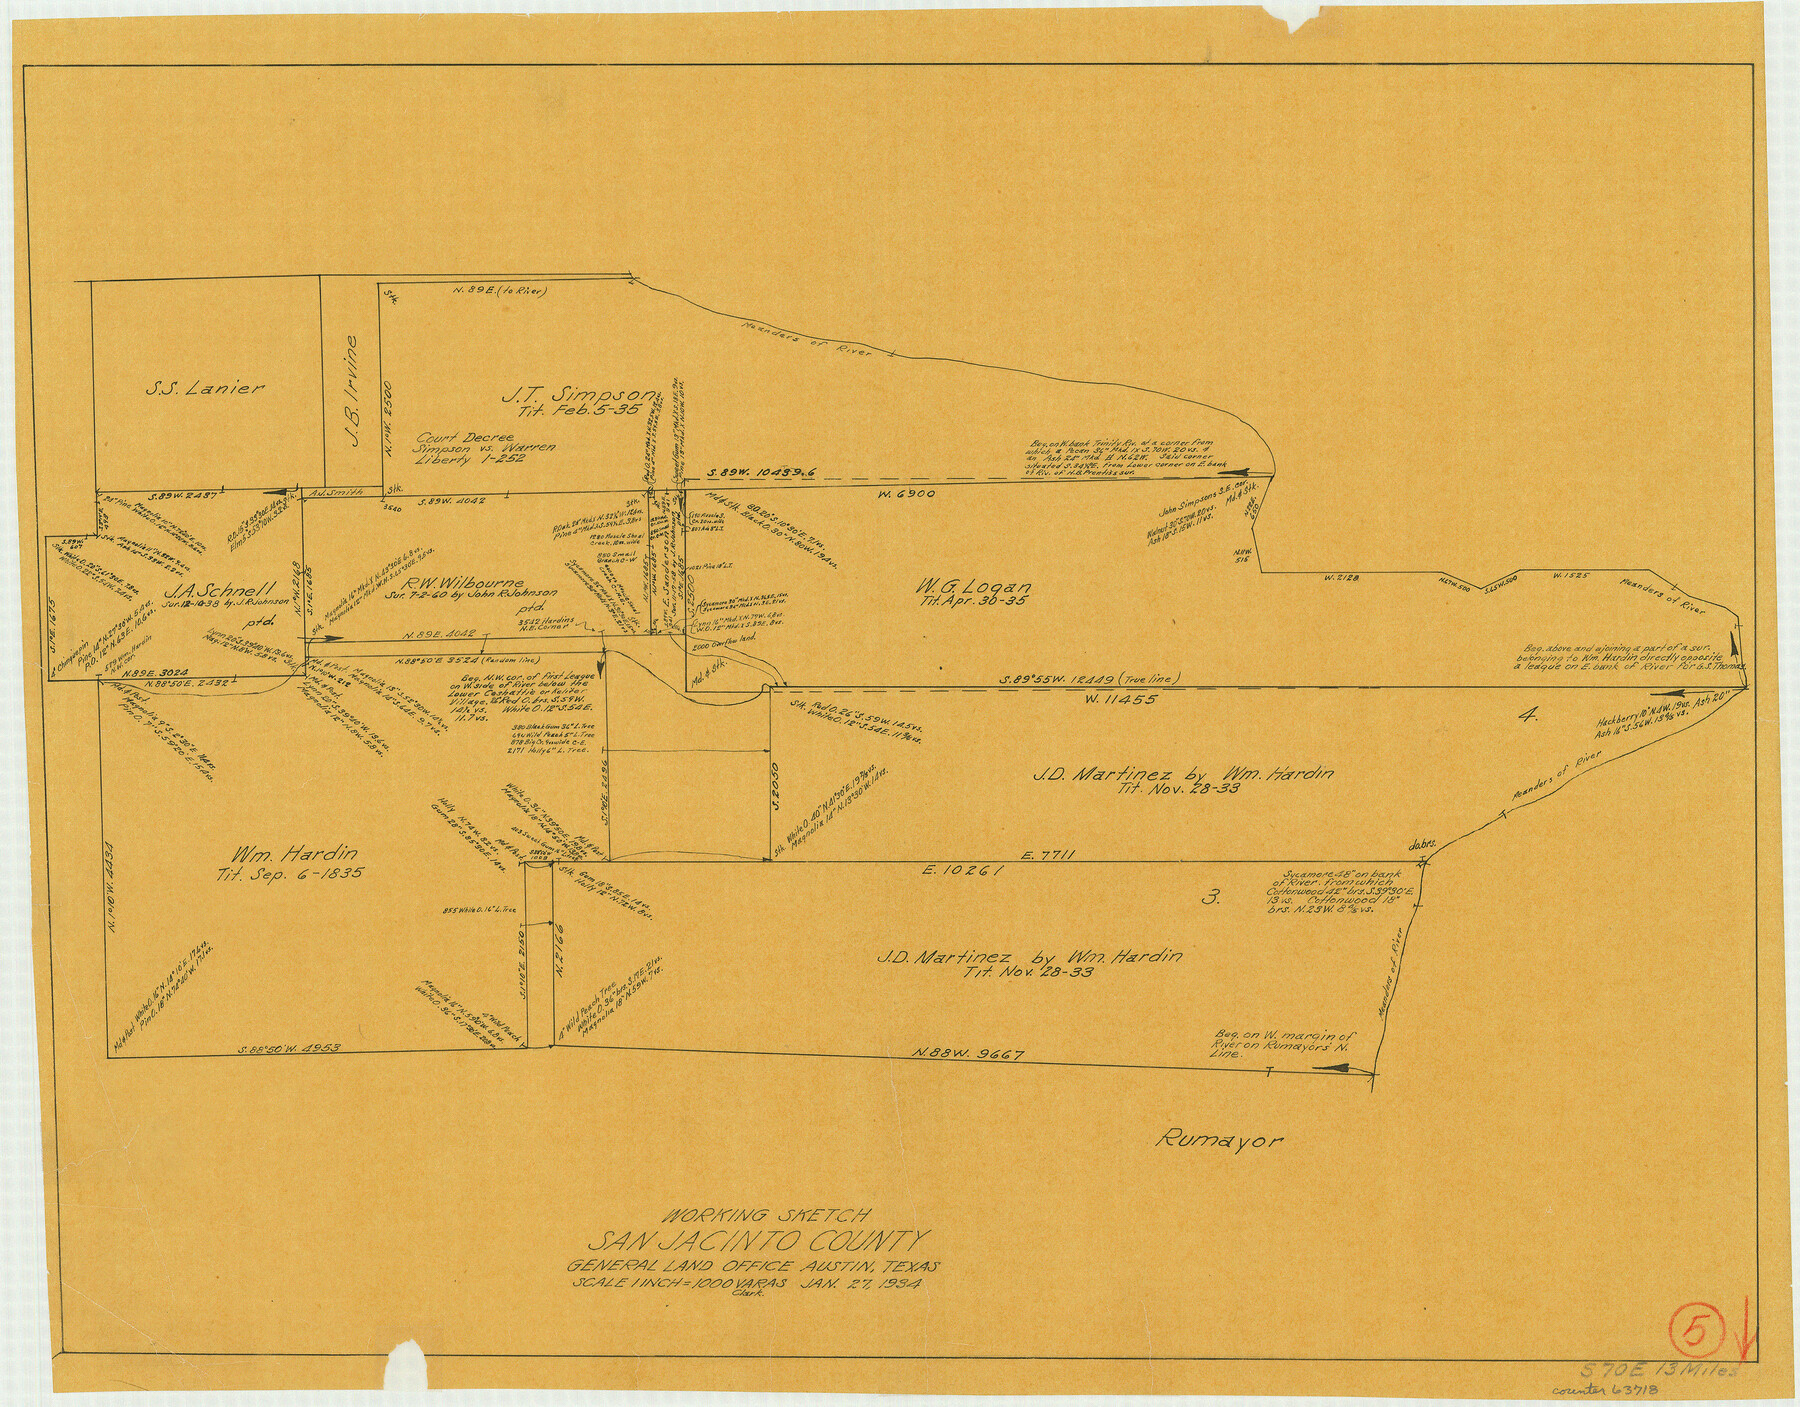 63718, San Jacinto County Working Sketch 5, General Map Collection